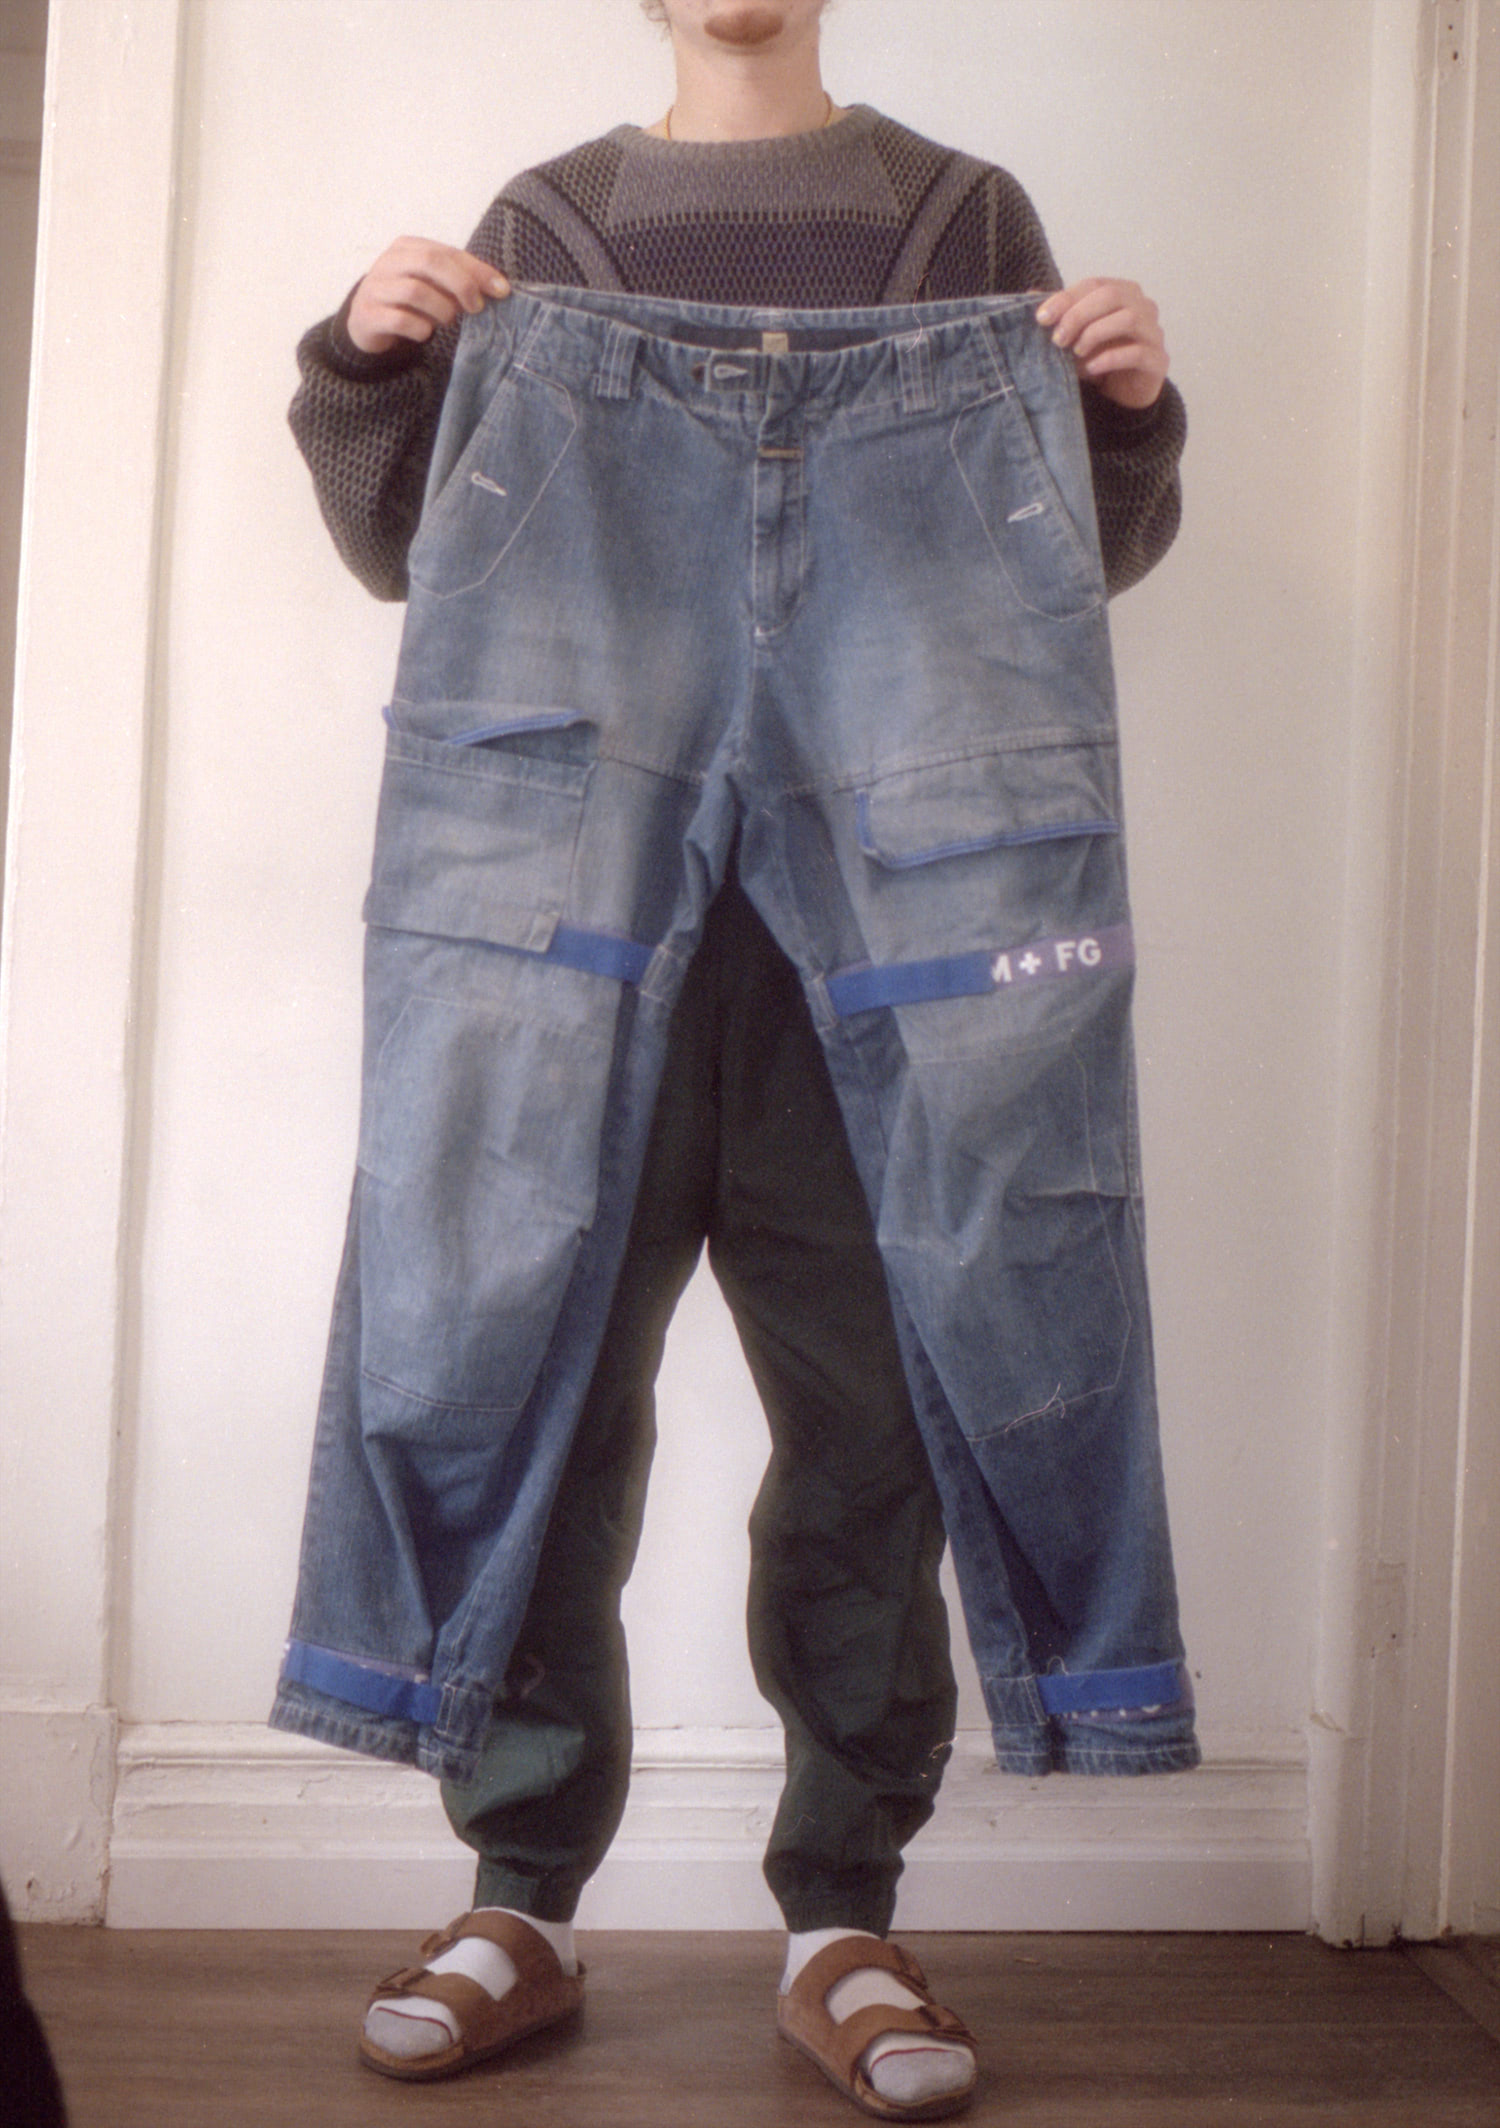 Image of Nick showcasing his jeans